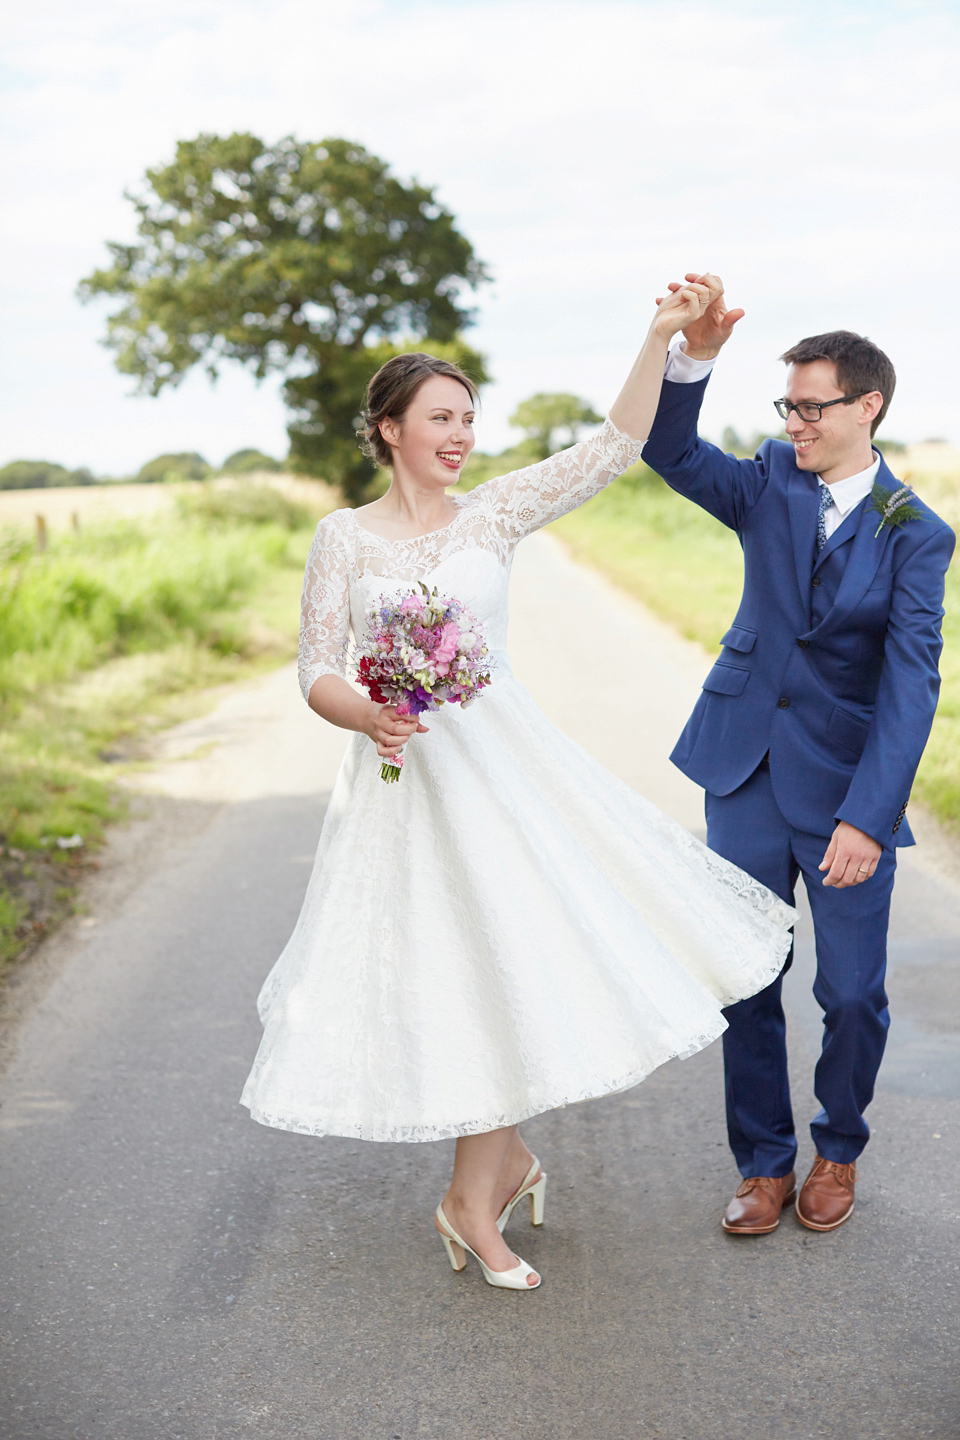 A fabulous 1950's Fur Coat No Knickers dress for a flower-filled Norfolk countryside wedding. Images by Fuller Photography.